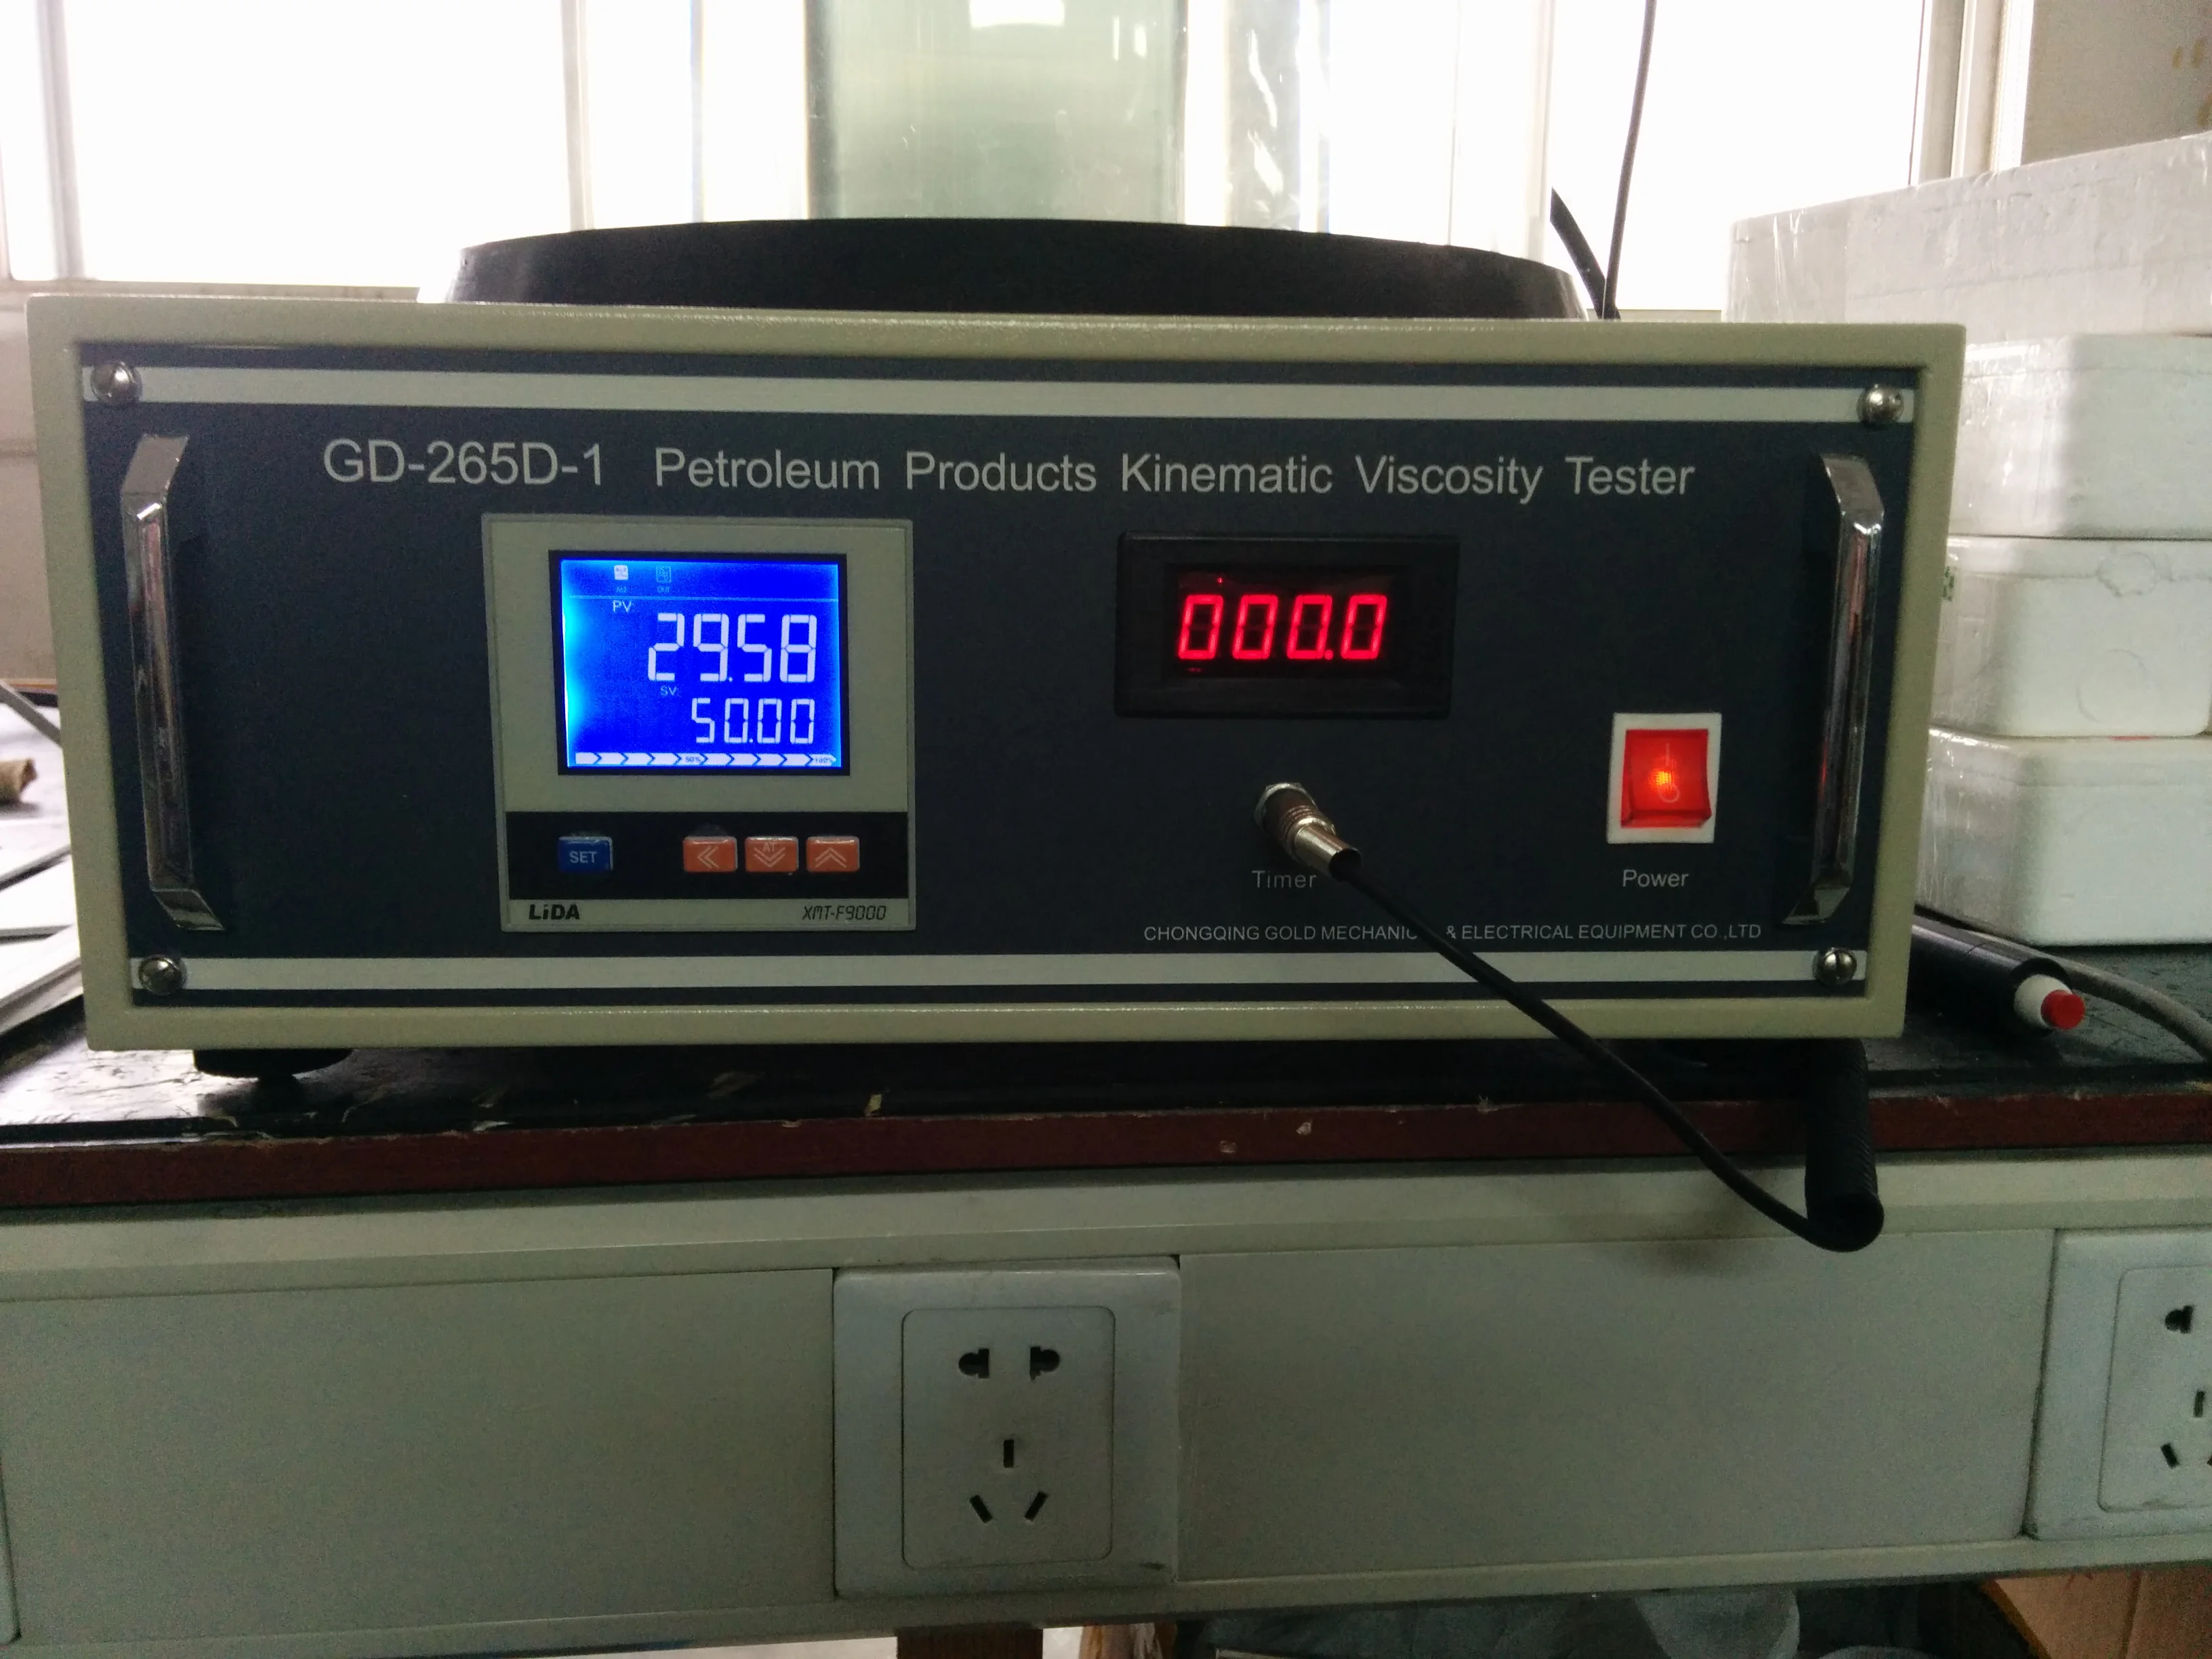 GD-265D-1 Petroleum Products Kinematic Viscosity testing instrument for 4pcs Samples Testing